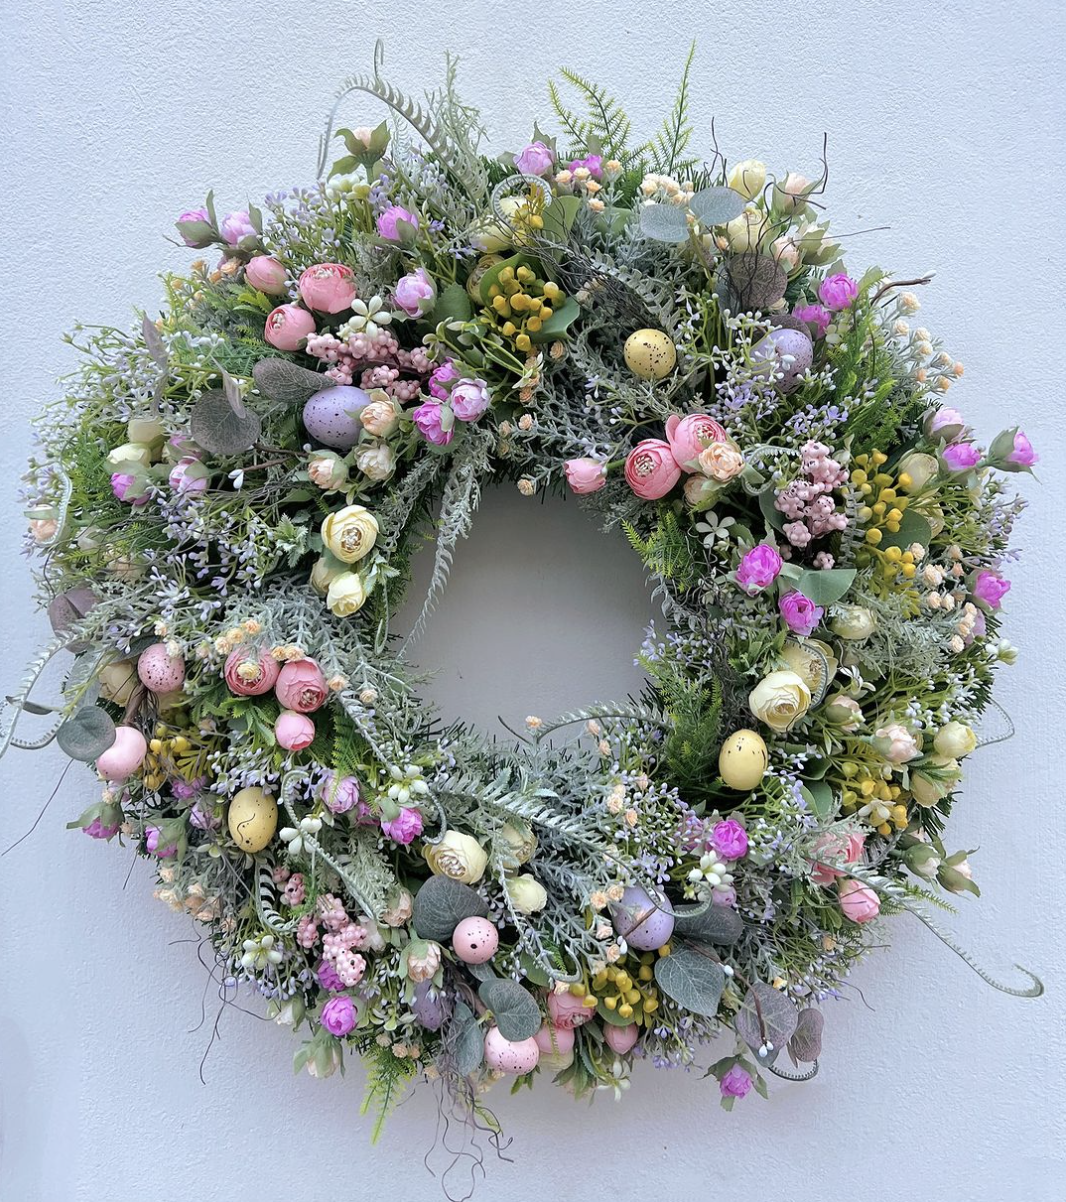 10 Easter Home Decor Ideas to Make Your Celebrations Eggs-tra Special - Easter wreath, pastel colors, easter eggs